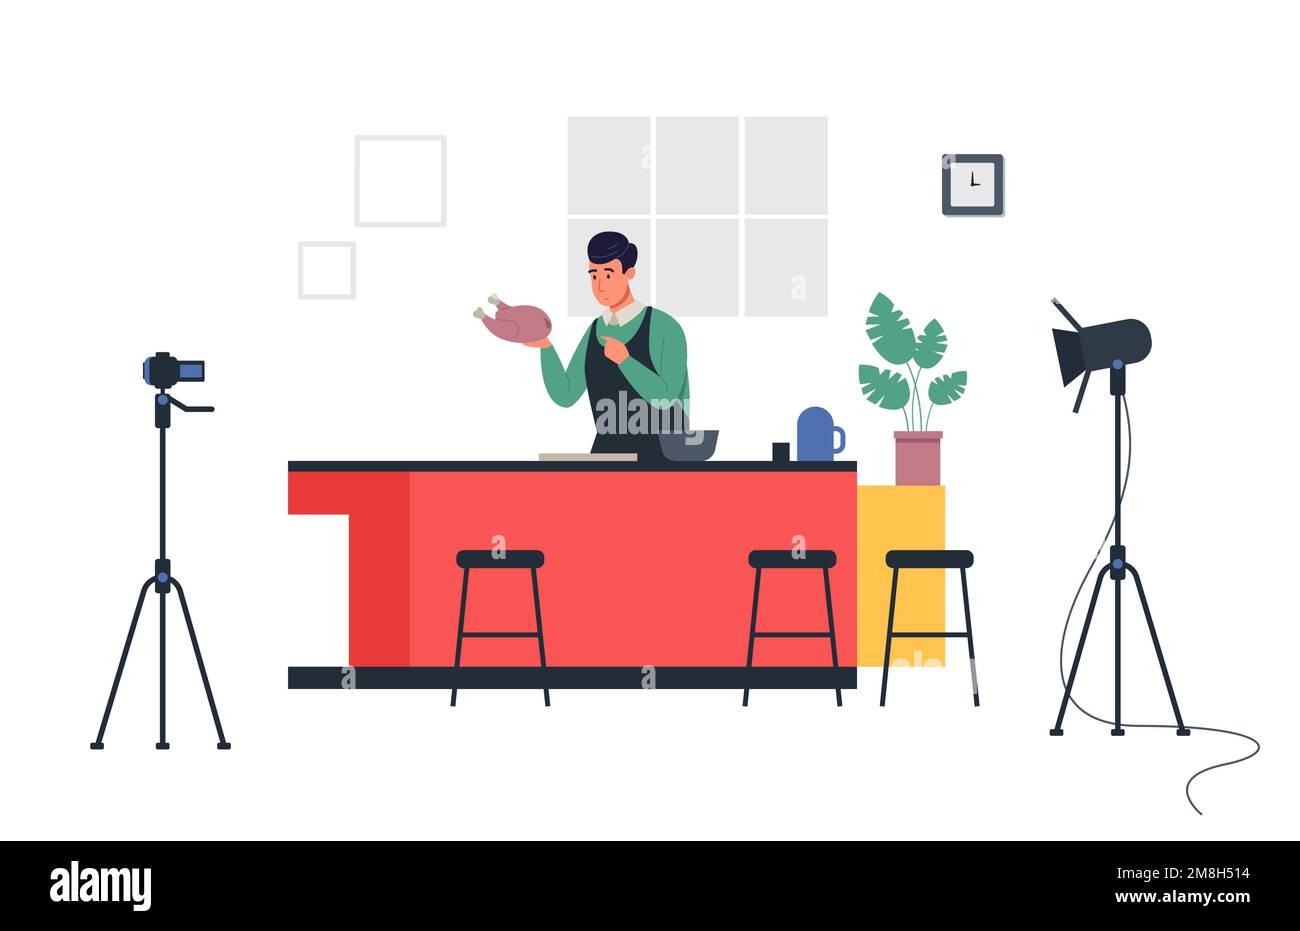 Cooking blogger. Male chef making food online in front of cameras. Character streaming and teaching how to prepare chicken Stock Vector